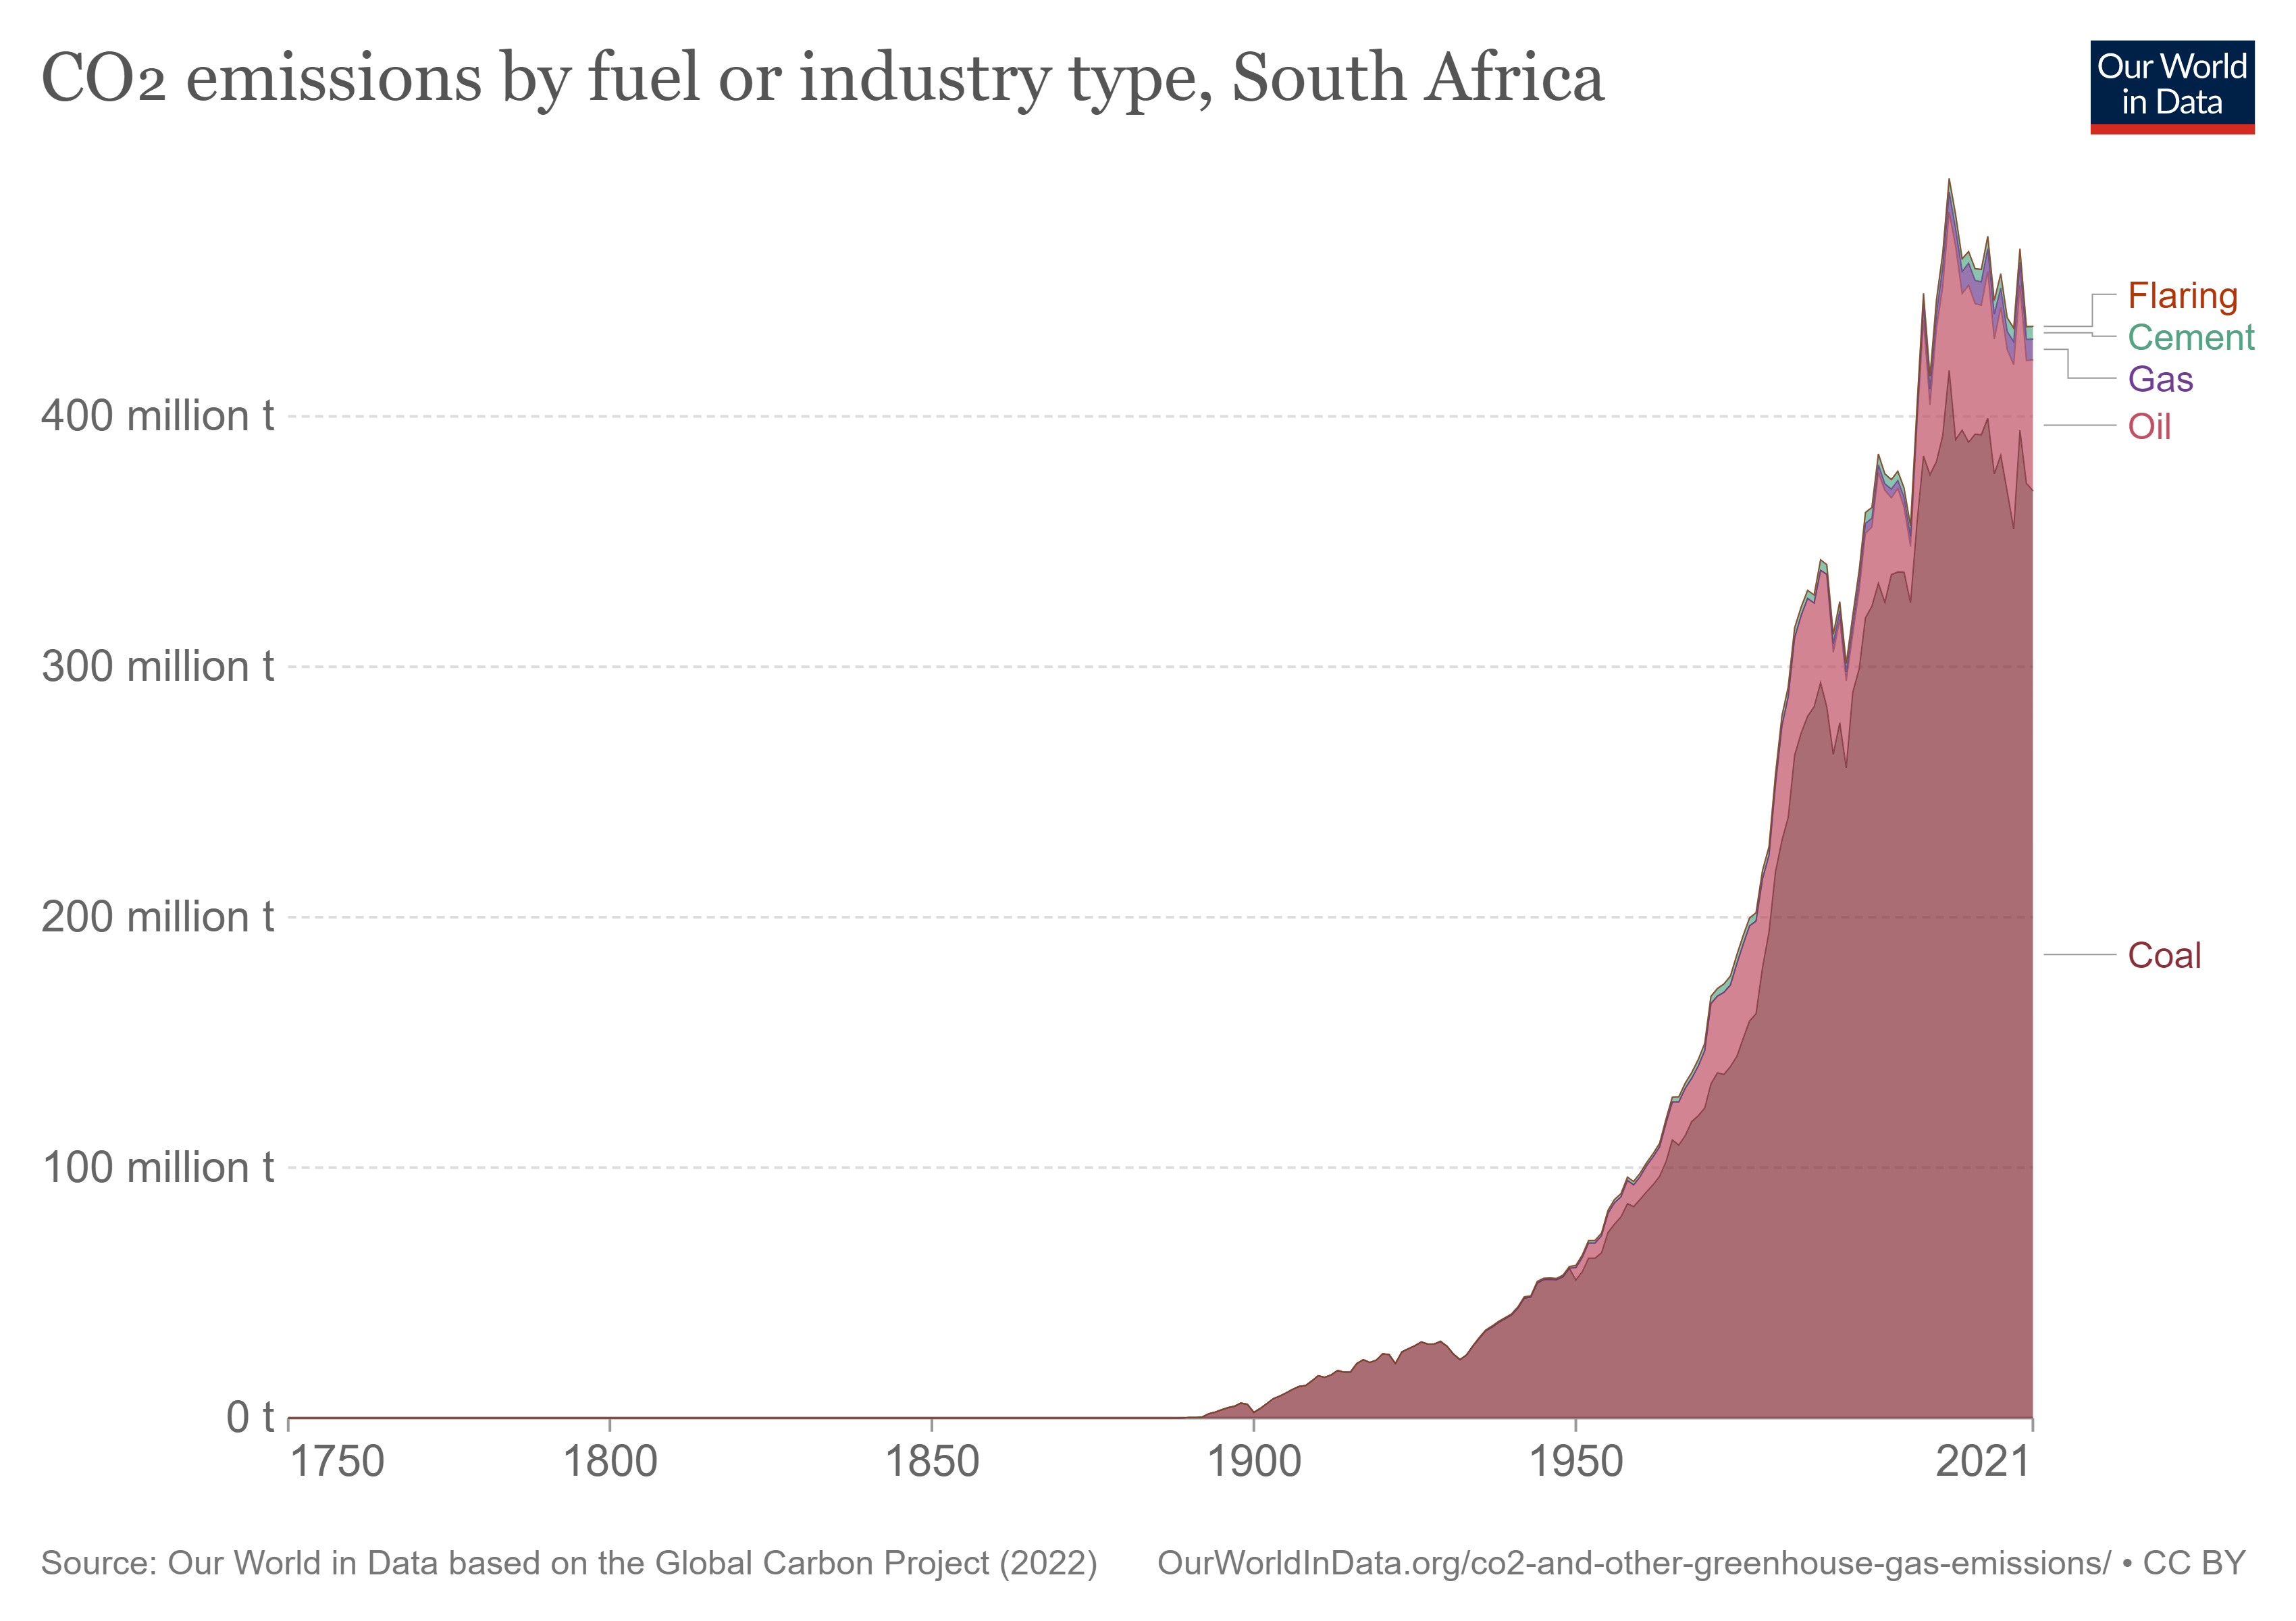 A graph with CO2 emissions in south africa by fuel type